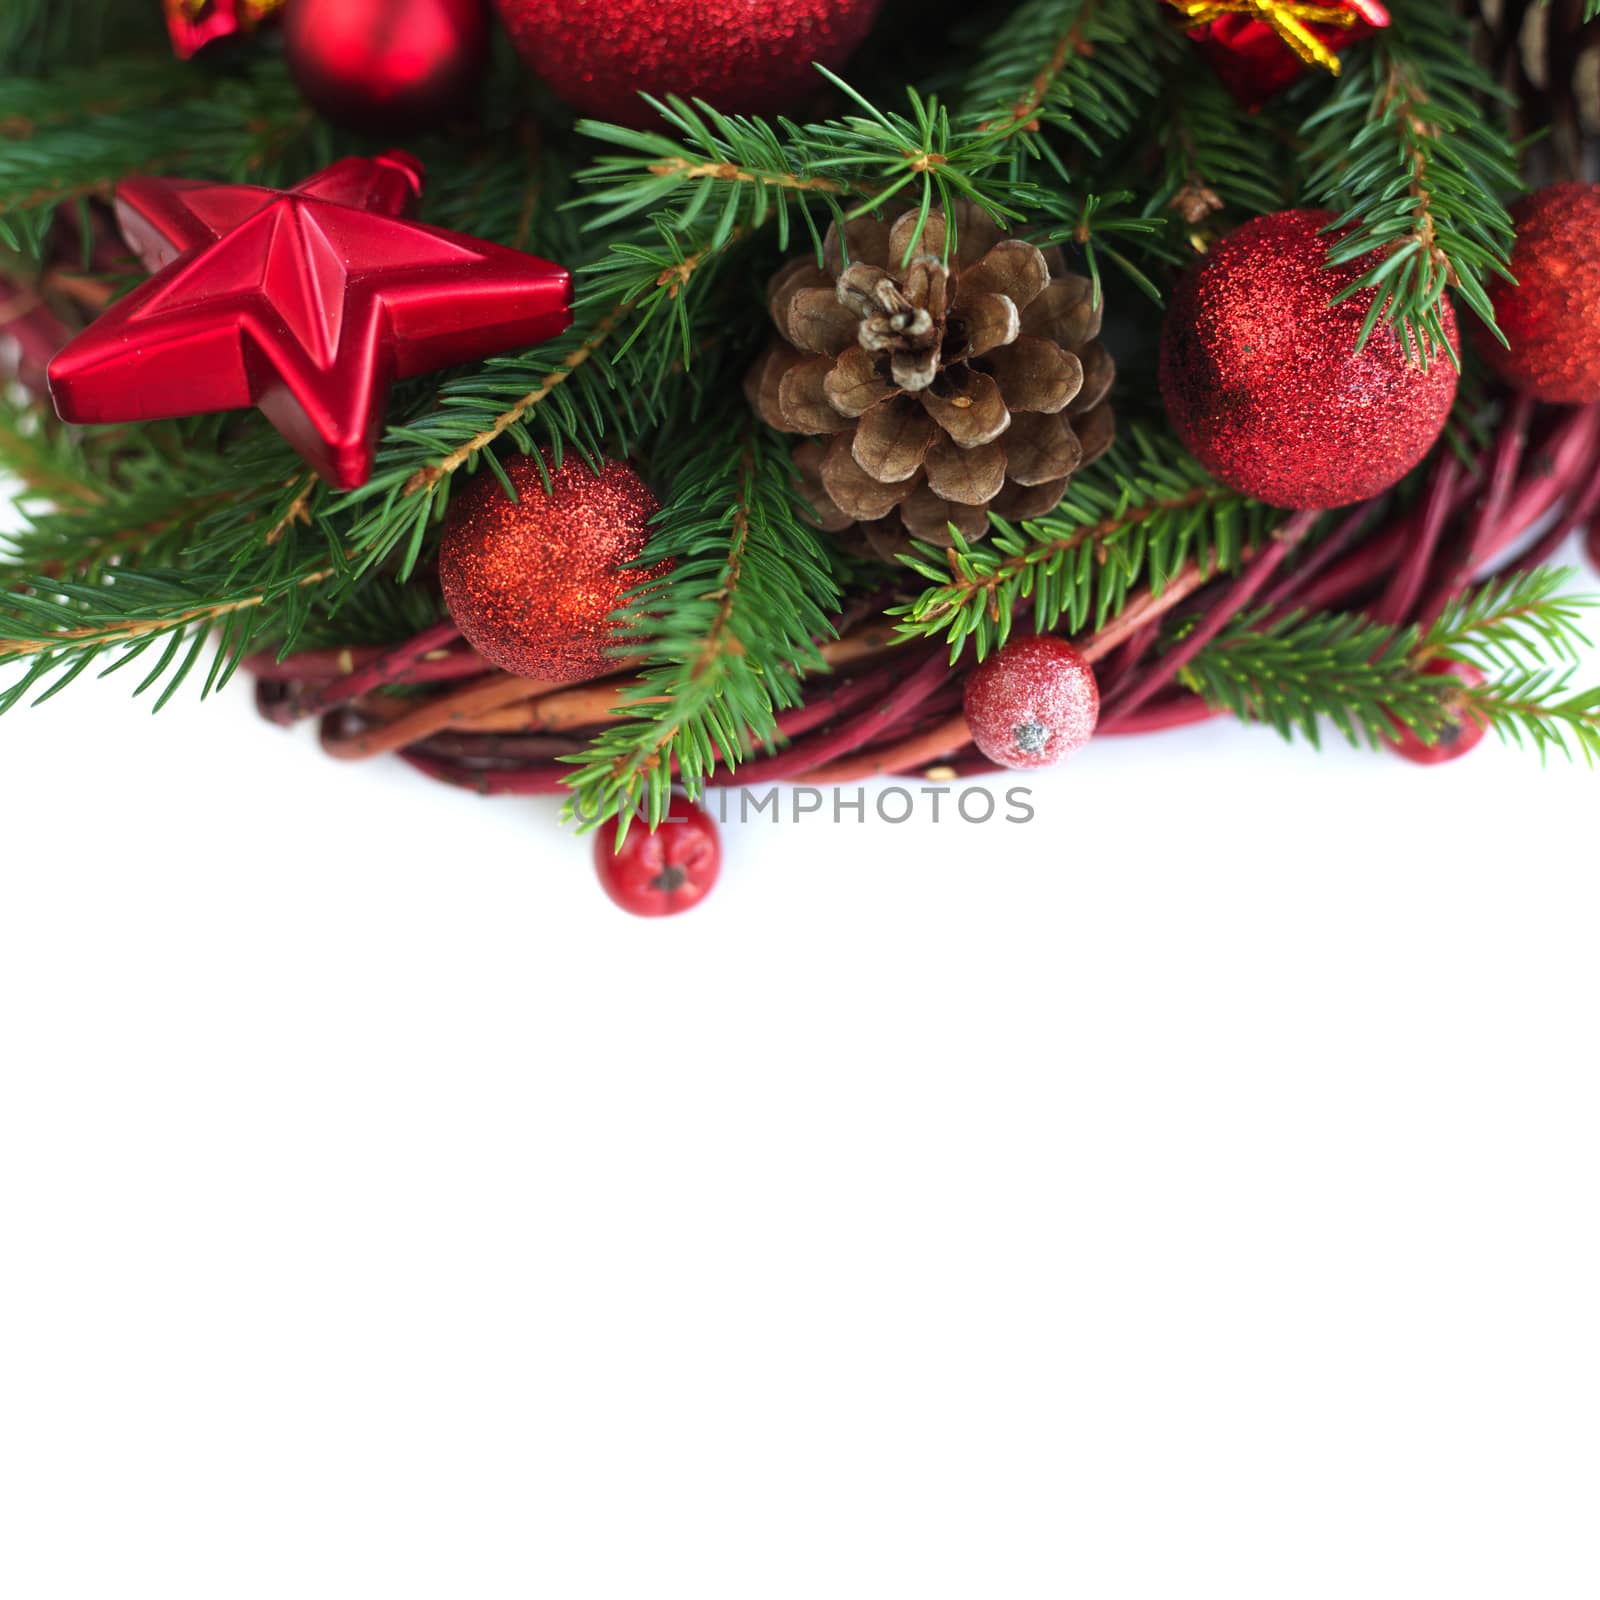 Christmas wreath of fir tree branches decorative beaubles and red berries isolated on white background copy space for text